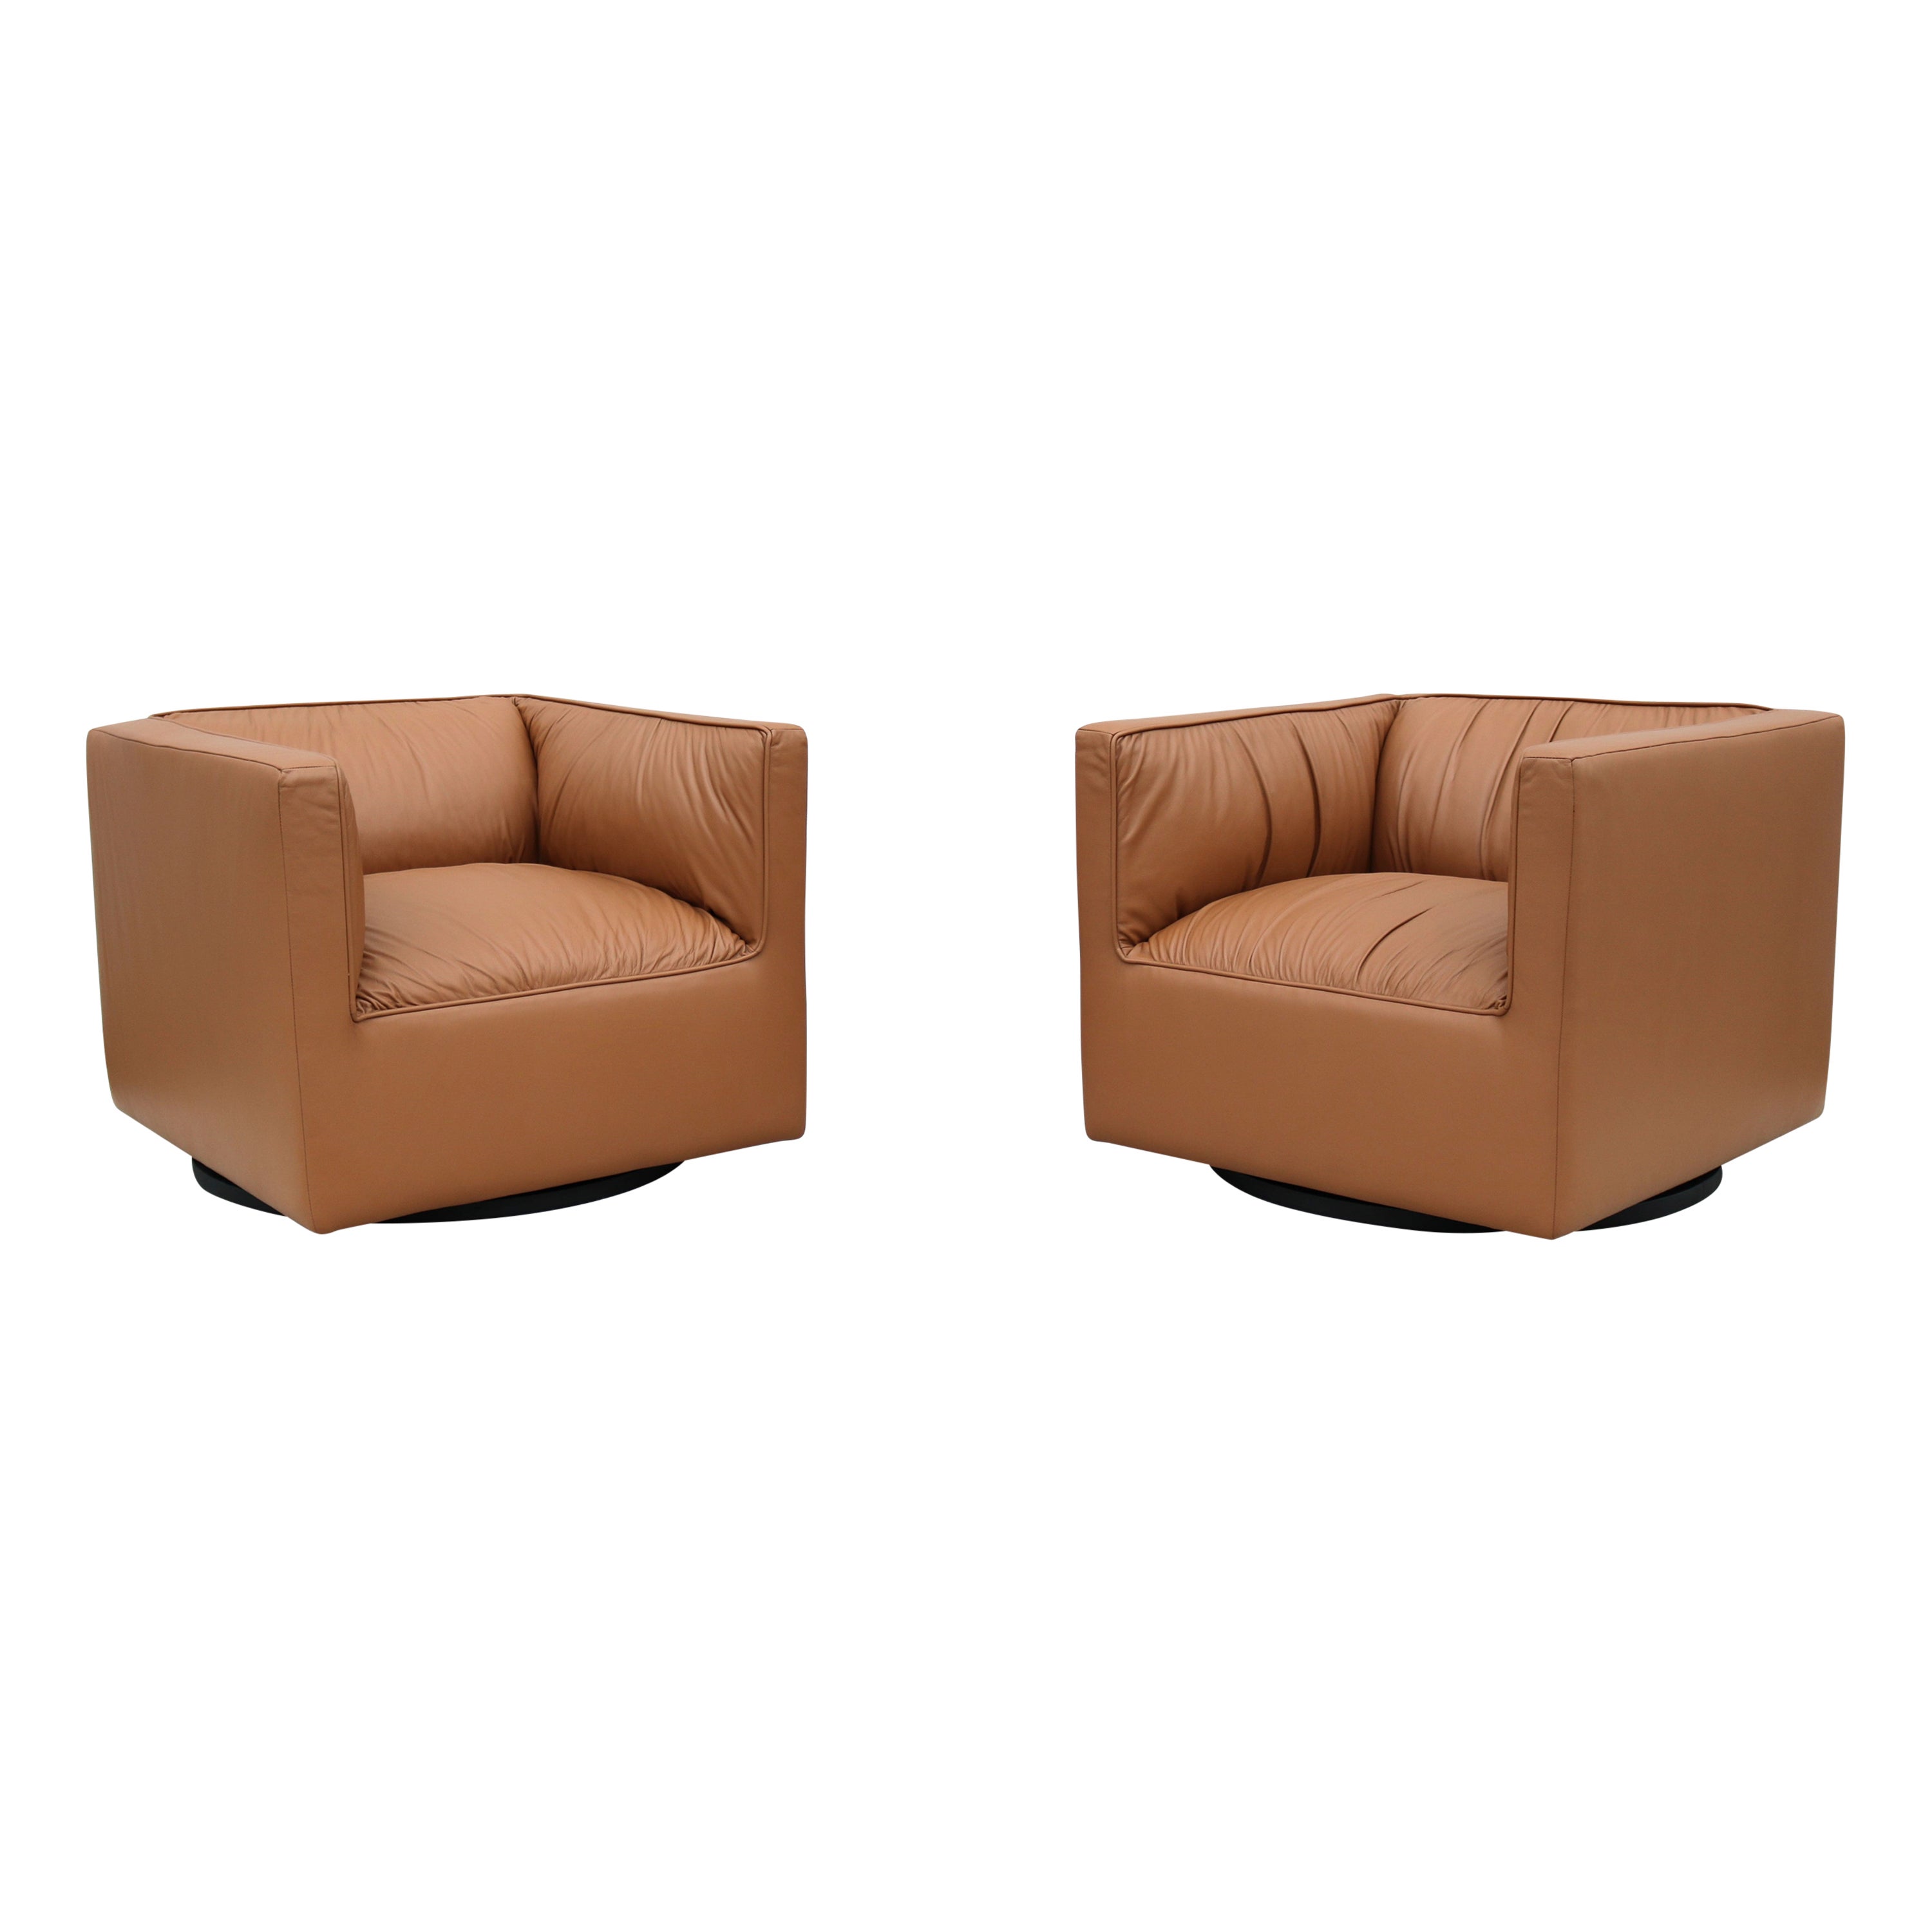 Modern Toan Nguyen for Studio TK Infinito Leather Swivel Lounge Chairs - a Pair